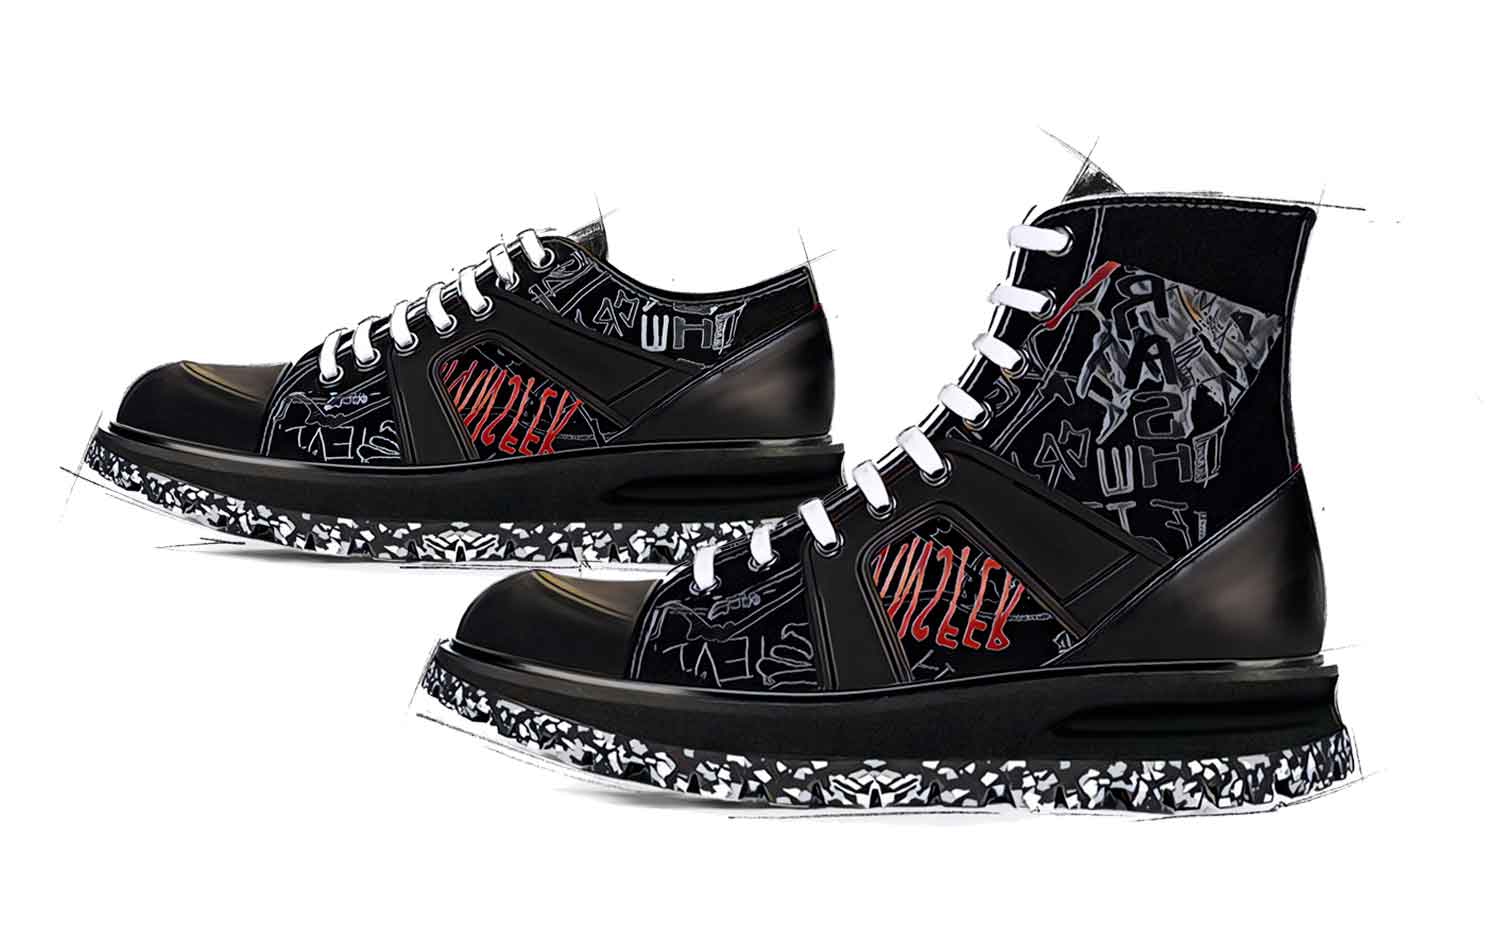 Men's Shoes Collection Trend Printed Graffiti FW20 - Footwear Design